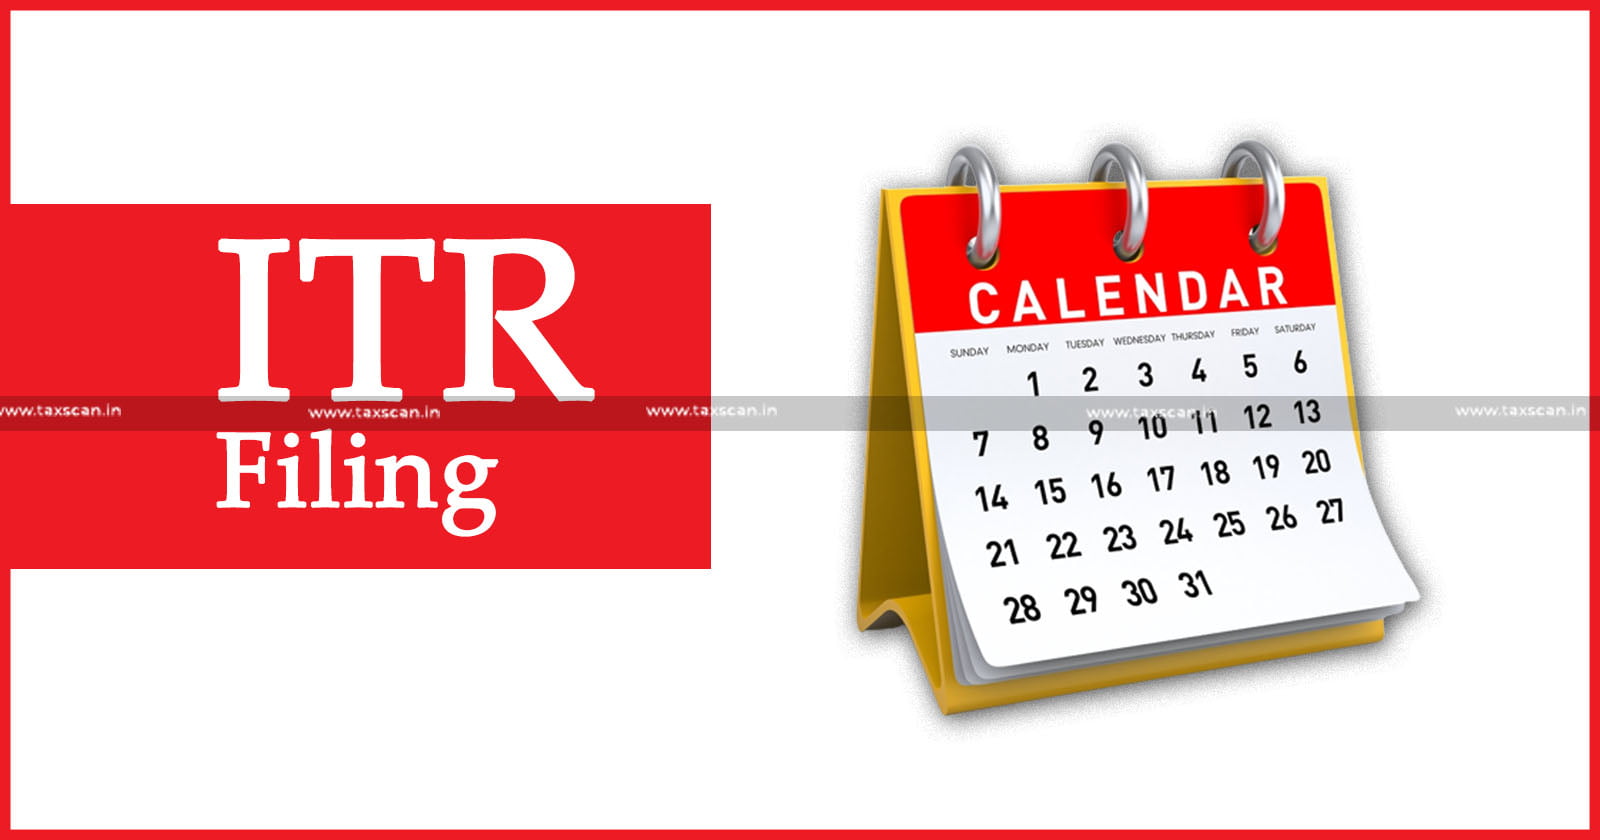 25 - Days - go - Check - important - ITR - Filing - Dates - TAXSCAN